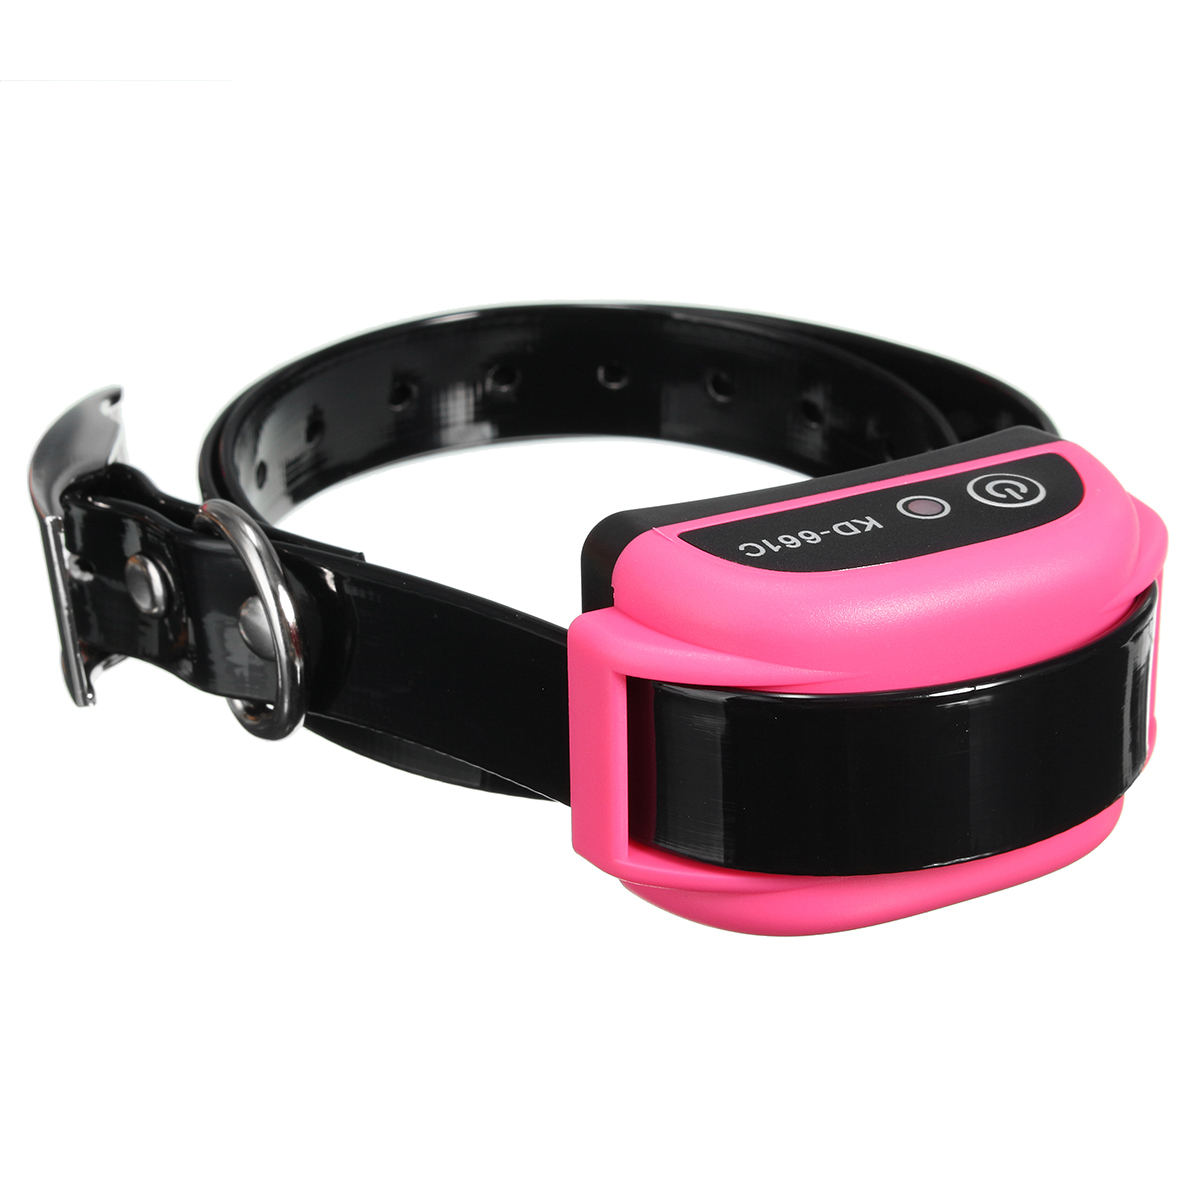 New Pink Wireless Pet Dog Electronic Fence Rechargeable ...